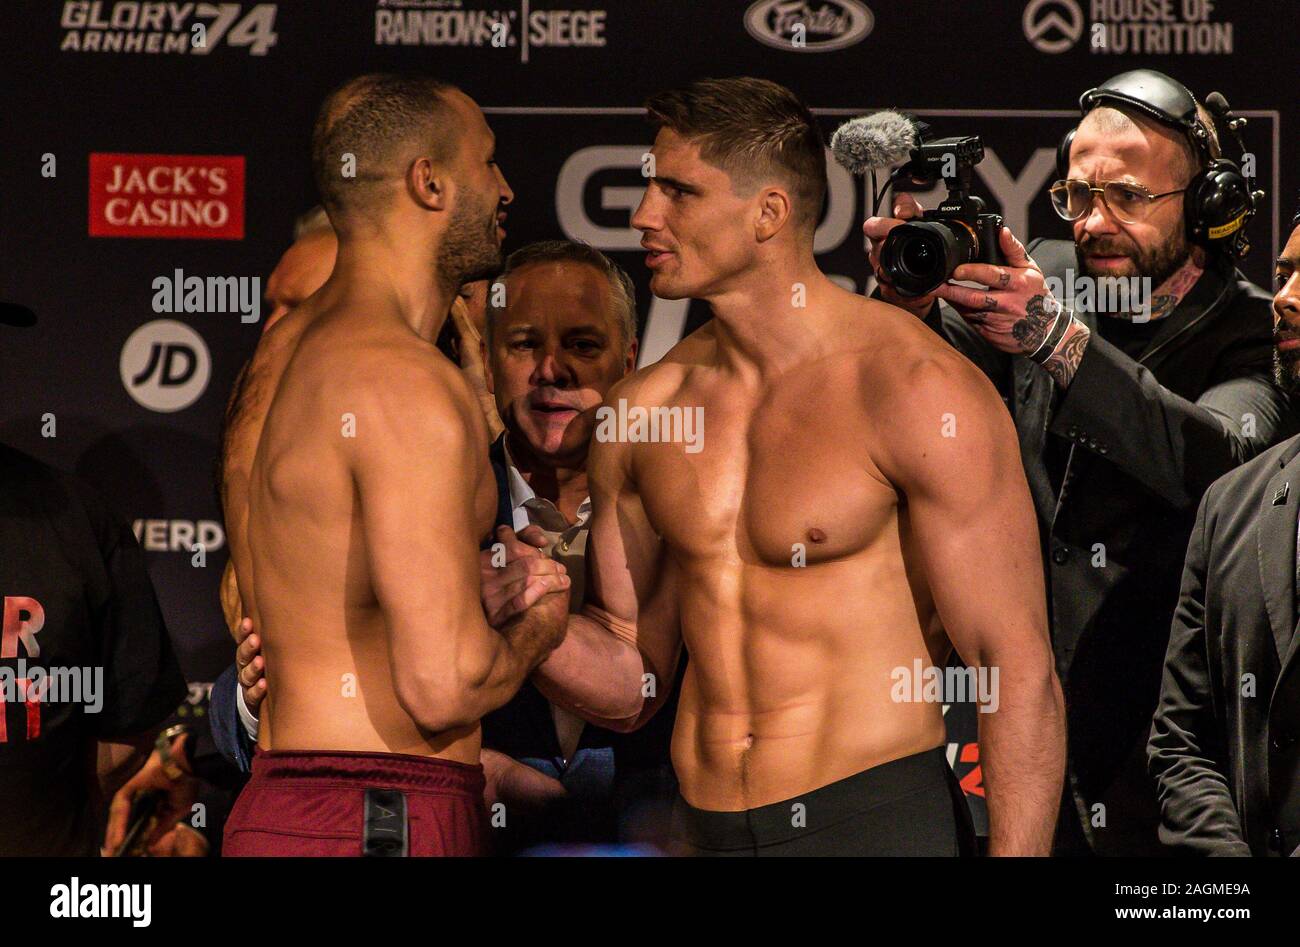 ARNHEM, 20-12-2019, Hotel Papendal, Weigh in and stare down, Glory Collision, Glory 74 en Colission 2 match Rico vs Badr, Badr Hari, Rico Verhoeven Credit Pro Shots/Alamy Live News Stock Photo